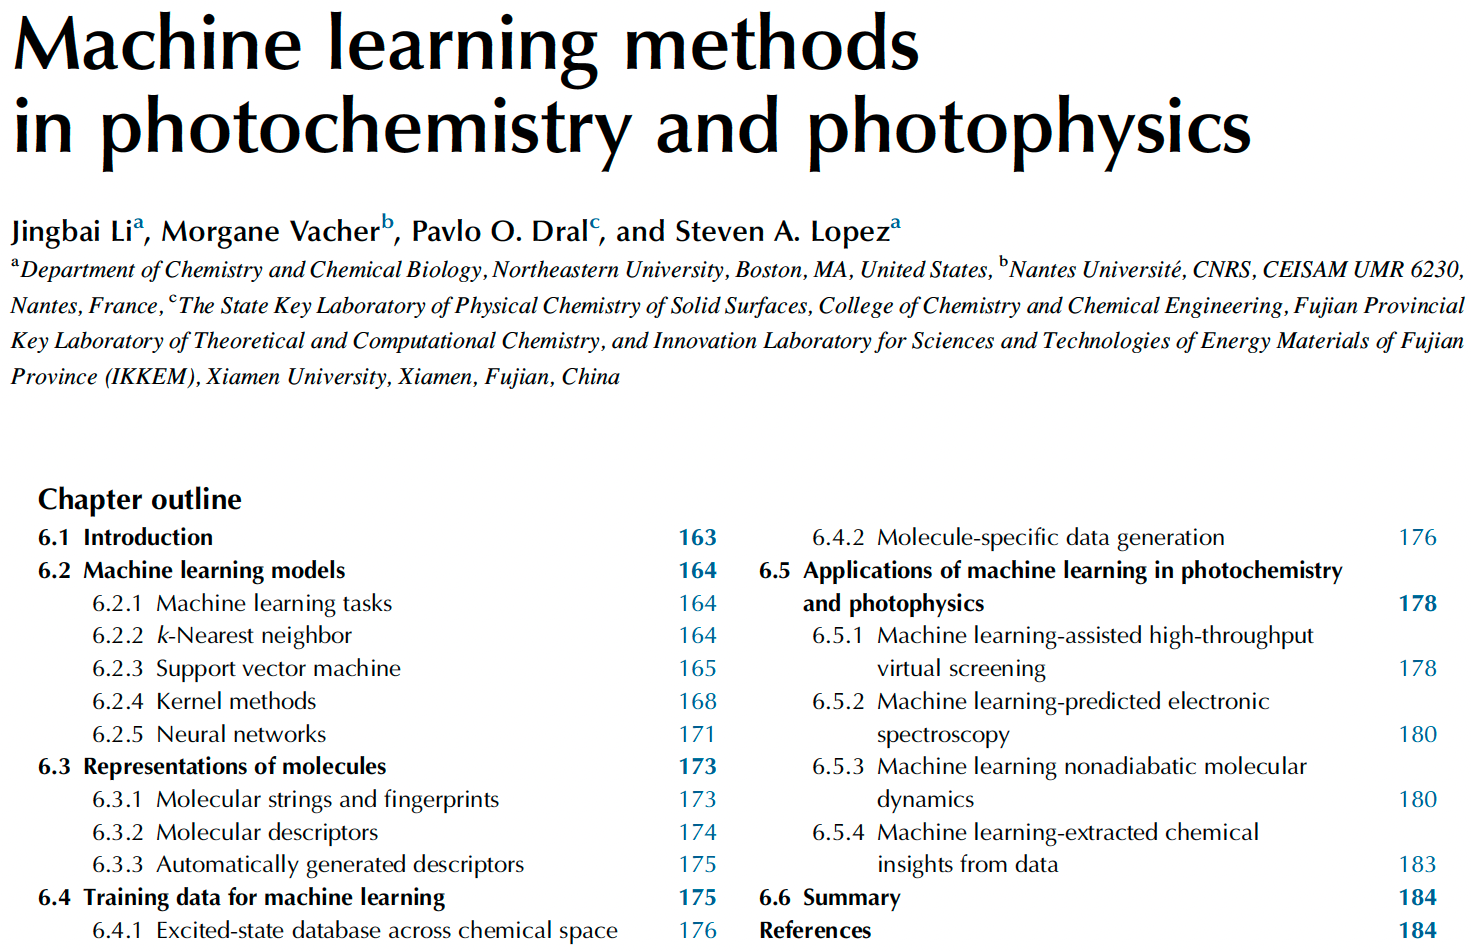 Chapter “Machine Learning Methods in Photochemistry and Photophysics”